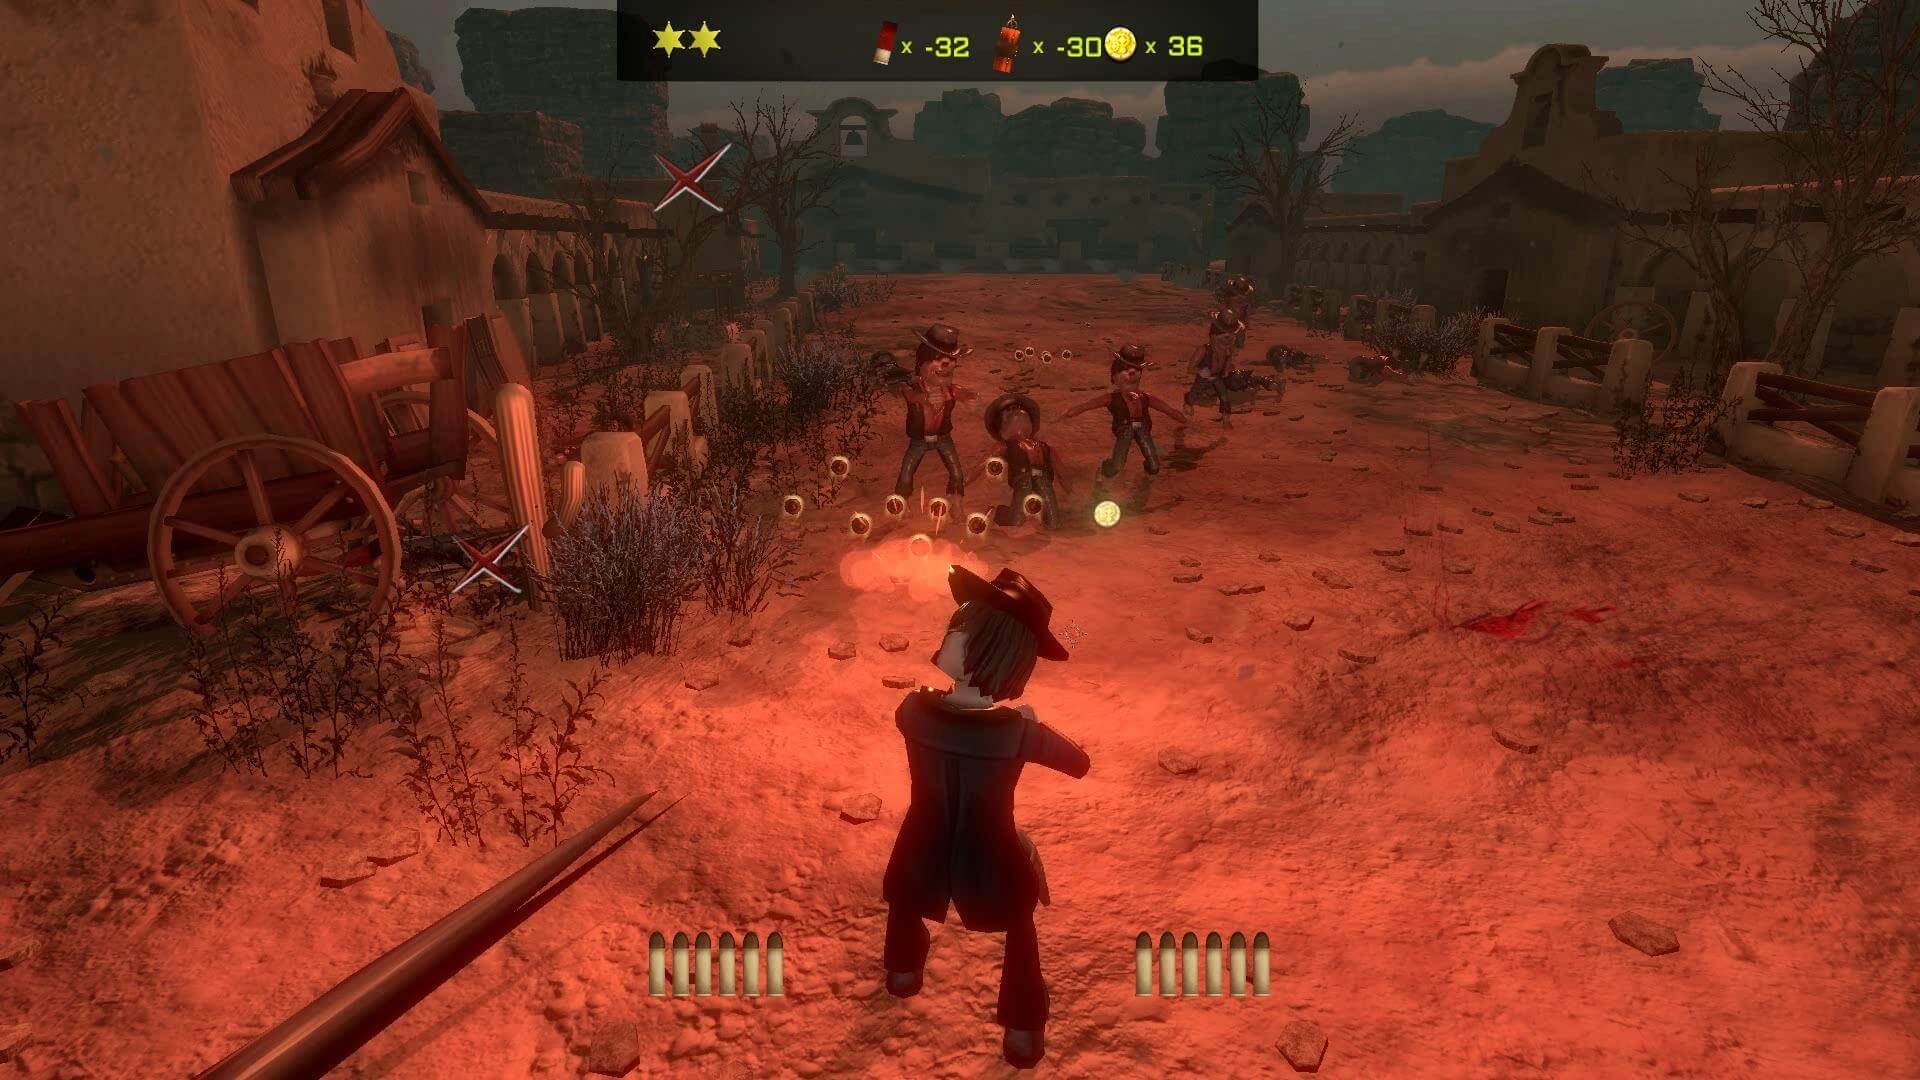 A cowboy shooting opponents in the Digital Homicide game Wyatt Derp